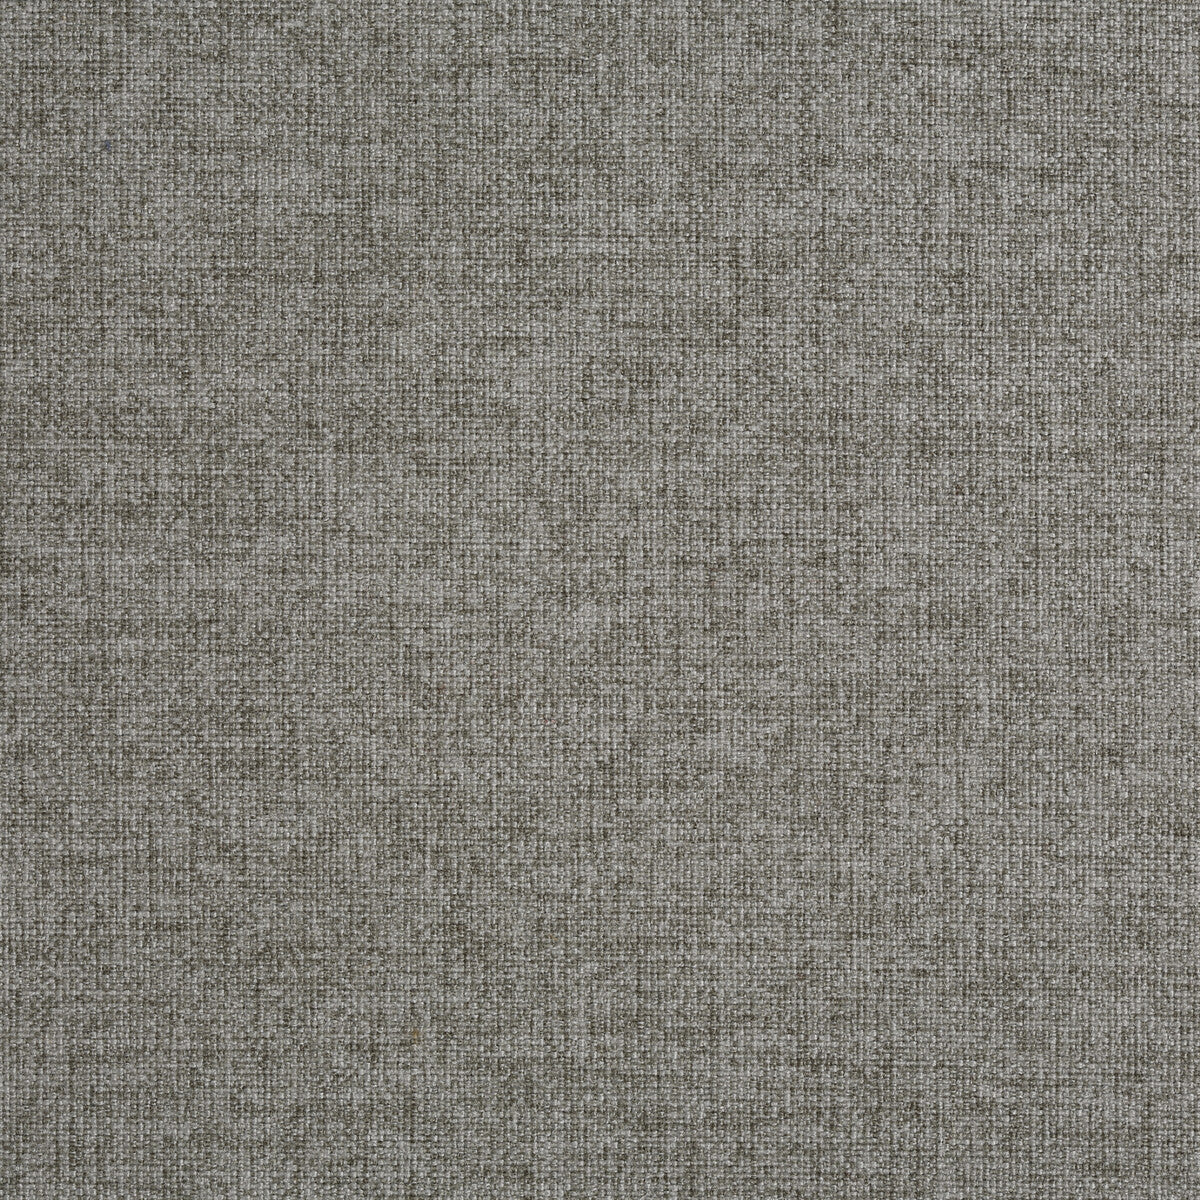 Kravet Smart fabric in 35121-11 color - pattern 35121.11.0 - by Kravet Smart in the Performance Crypton Home collection